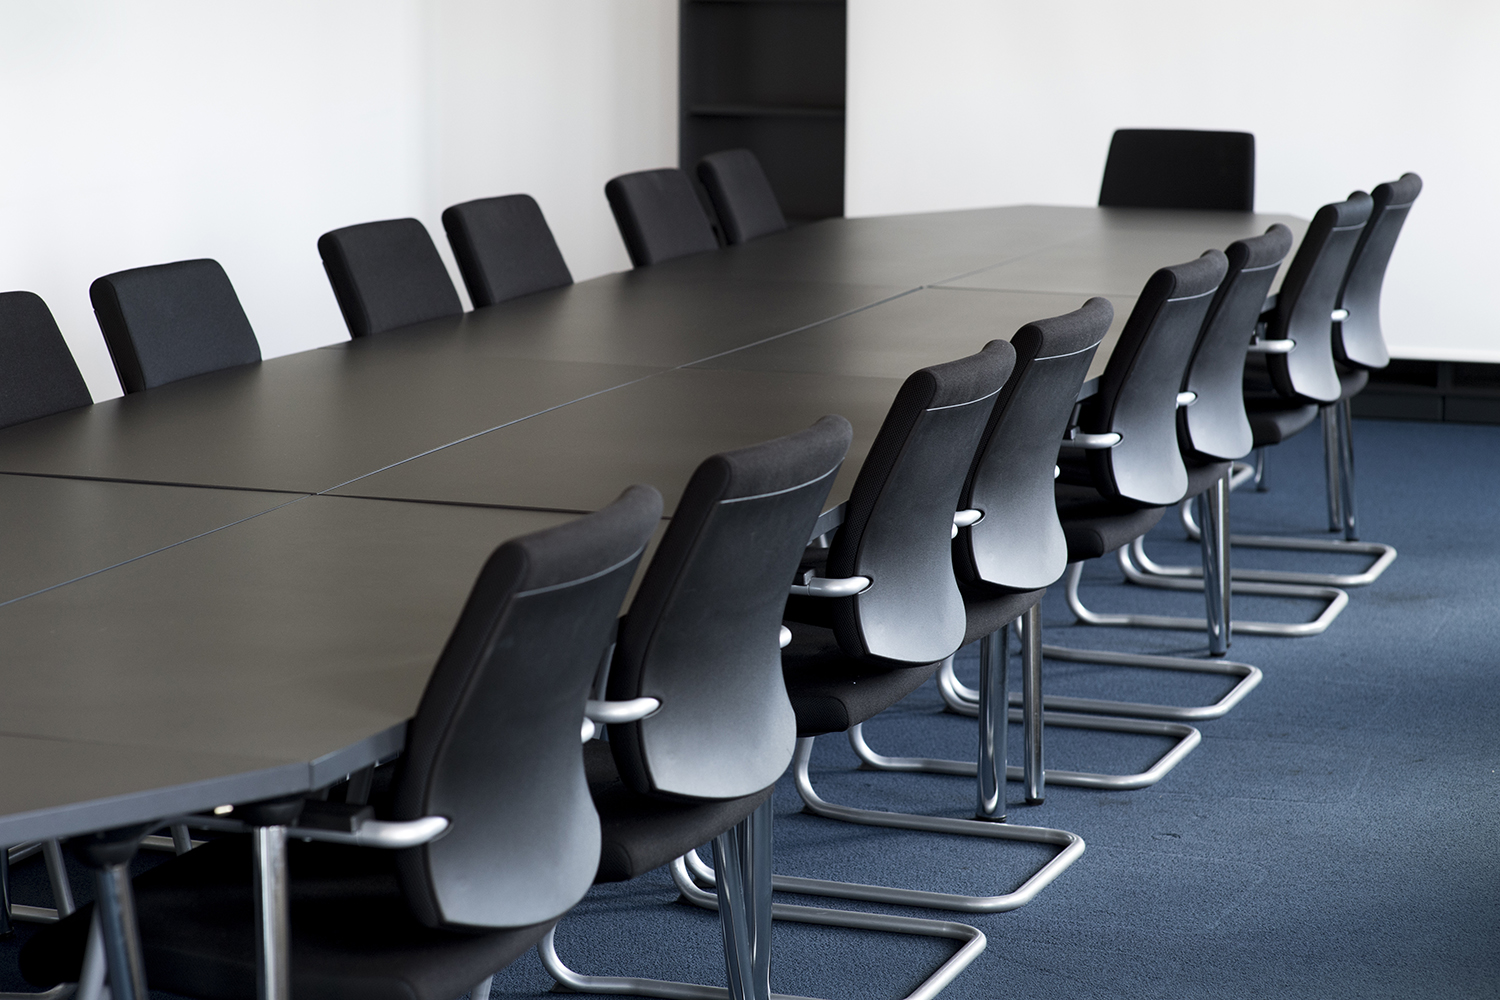 An image of a conference table and black chairs around it in a meeting room